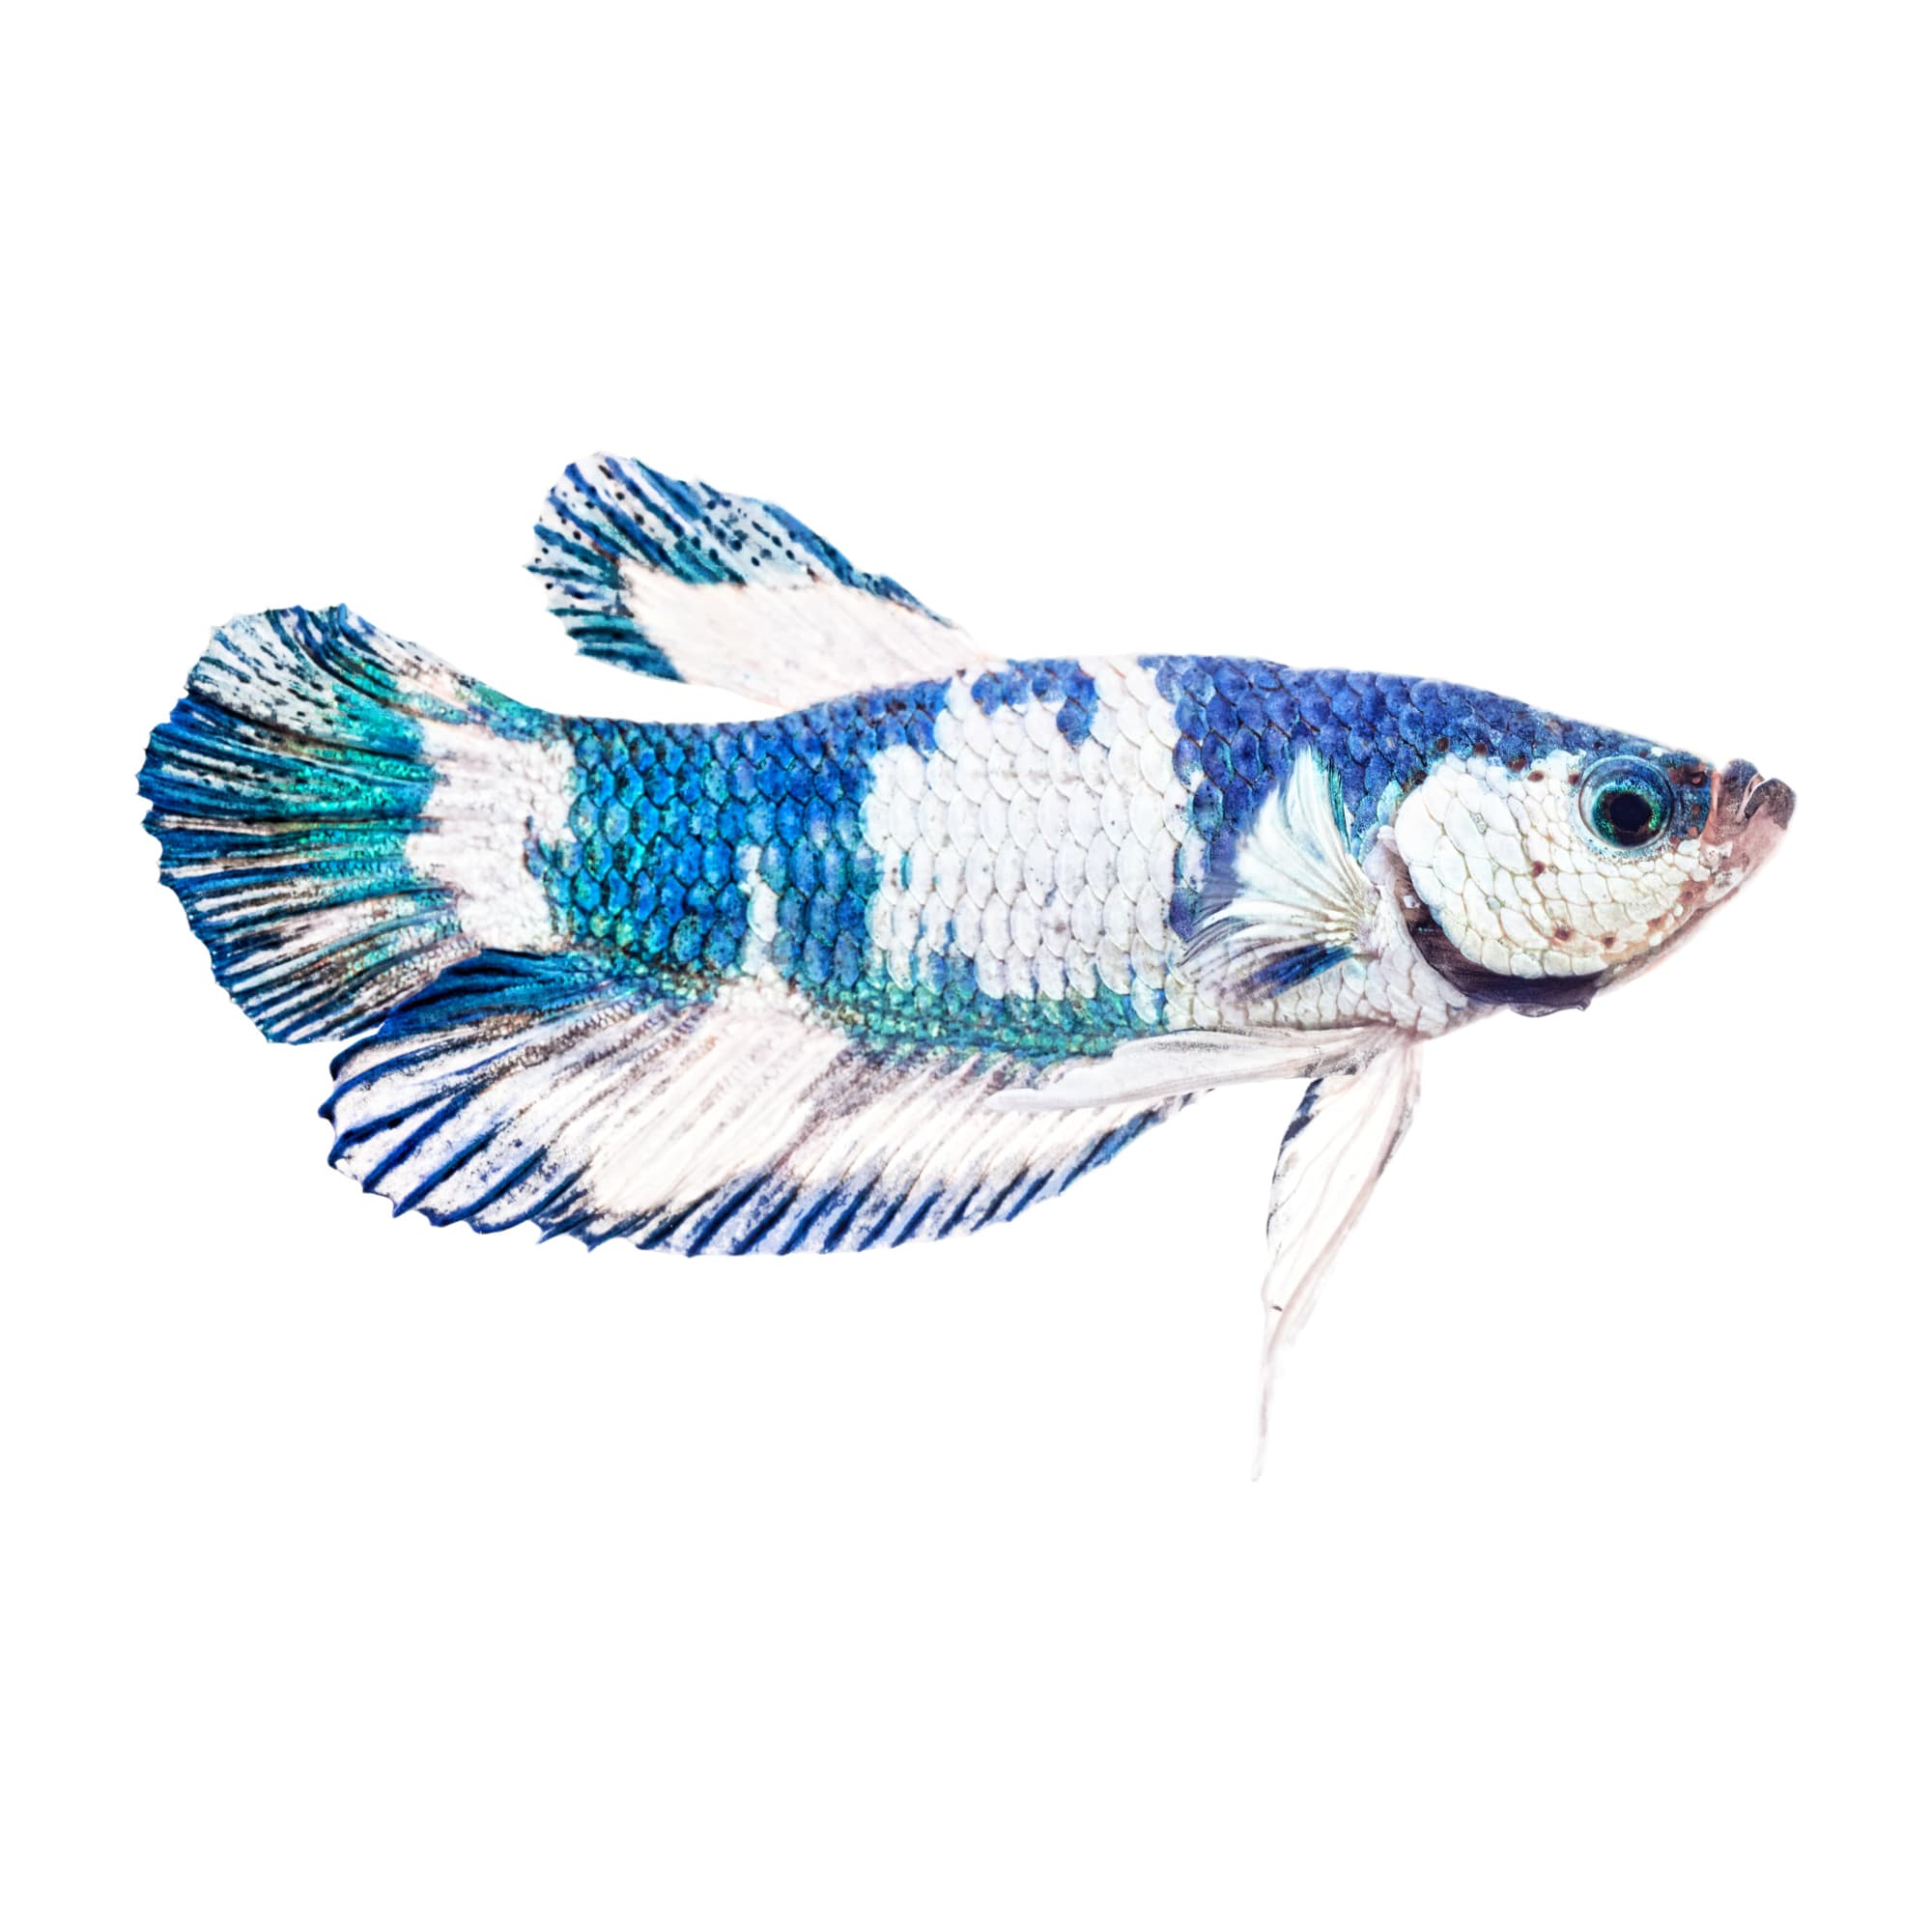 Male Blue Marble Bettas For Sale Order Online Petco